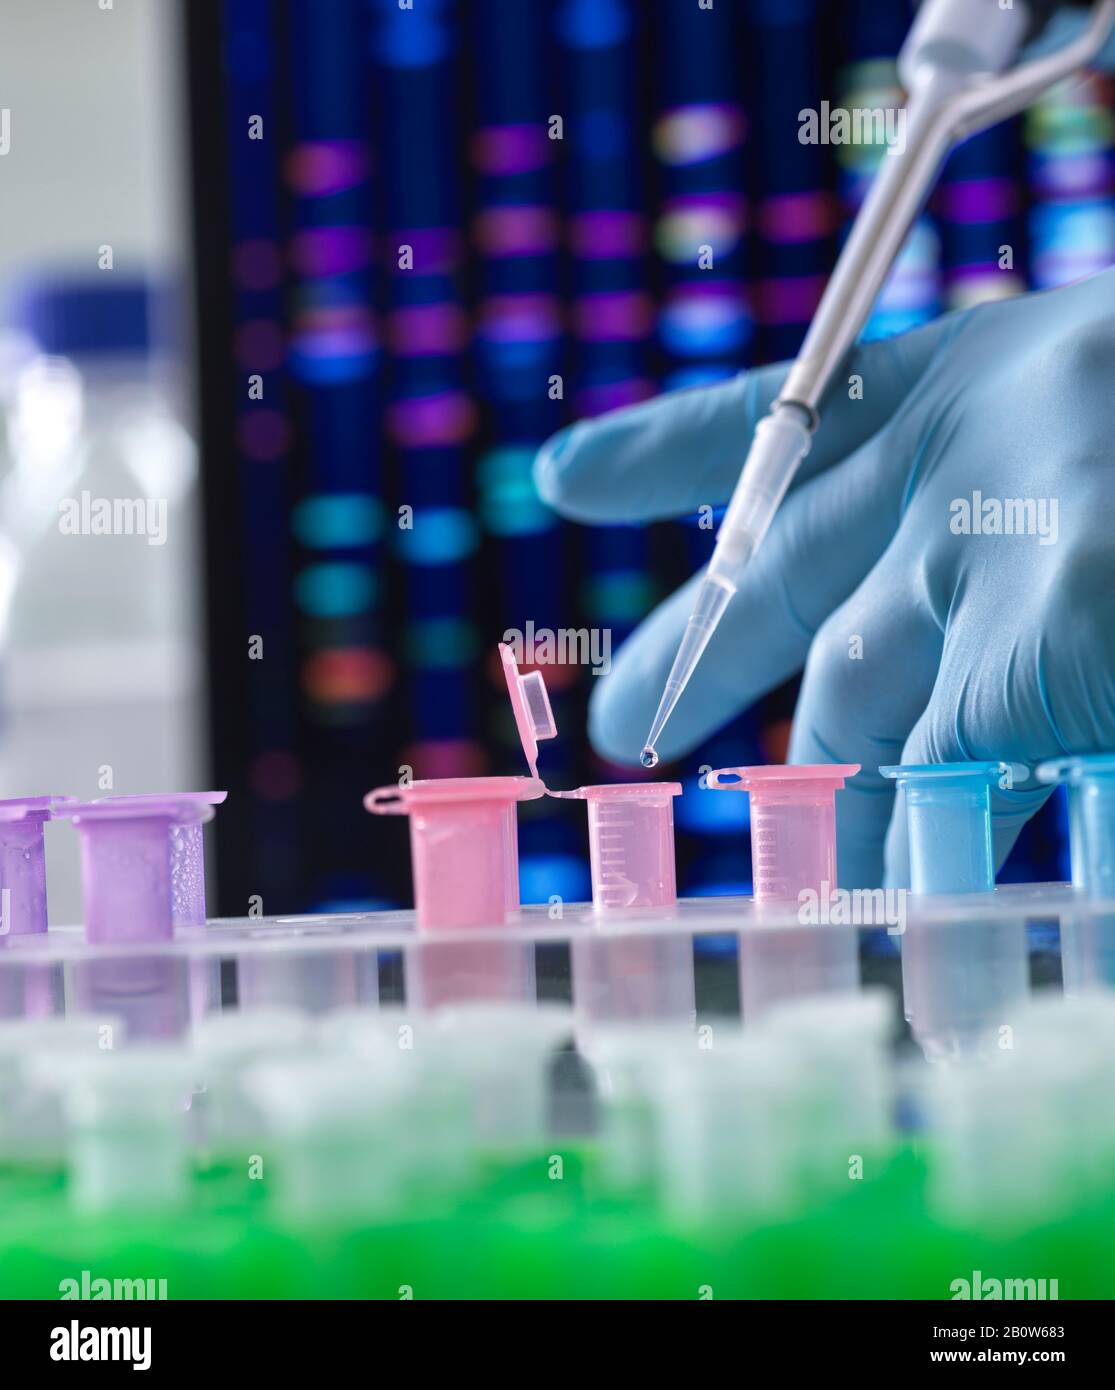 Scientist pipetting DNA samples into microcentrifuge tubes during an experiment in the laboratory with the DNA profile on the monitor screen. Stock Photo